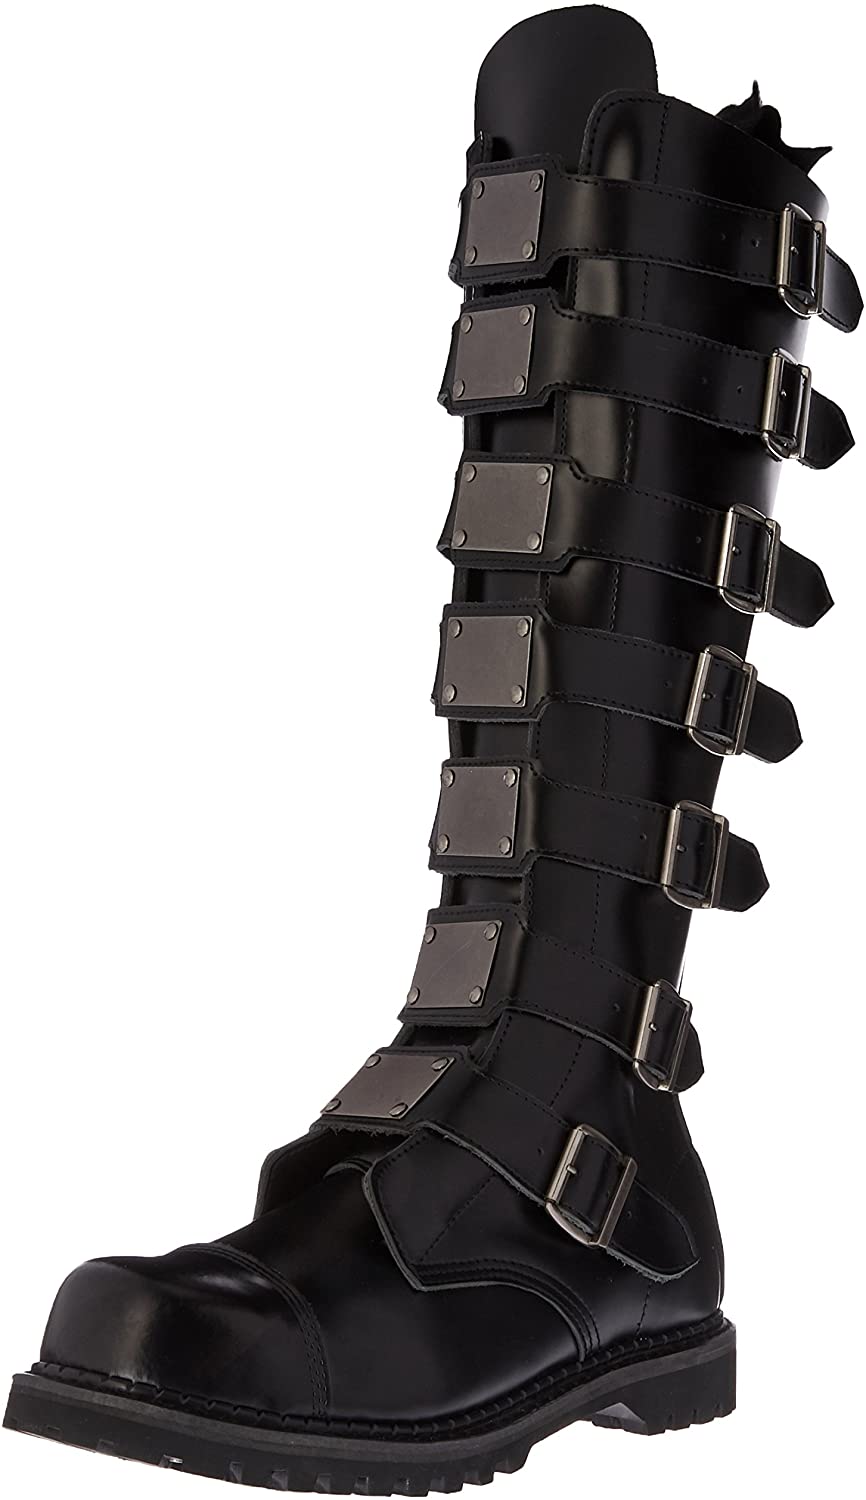 outer view of Real black leather 1 1/2'' heel, 30 eyelet, knee high boot with steel toe, 7 metal plate straps on front and full inner side zipper.